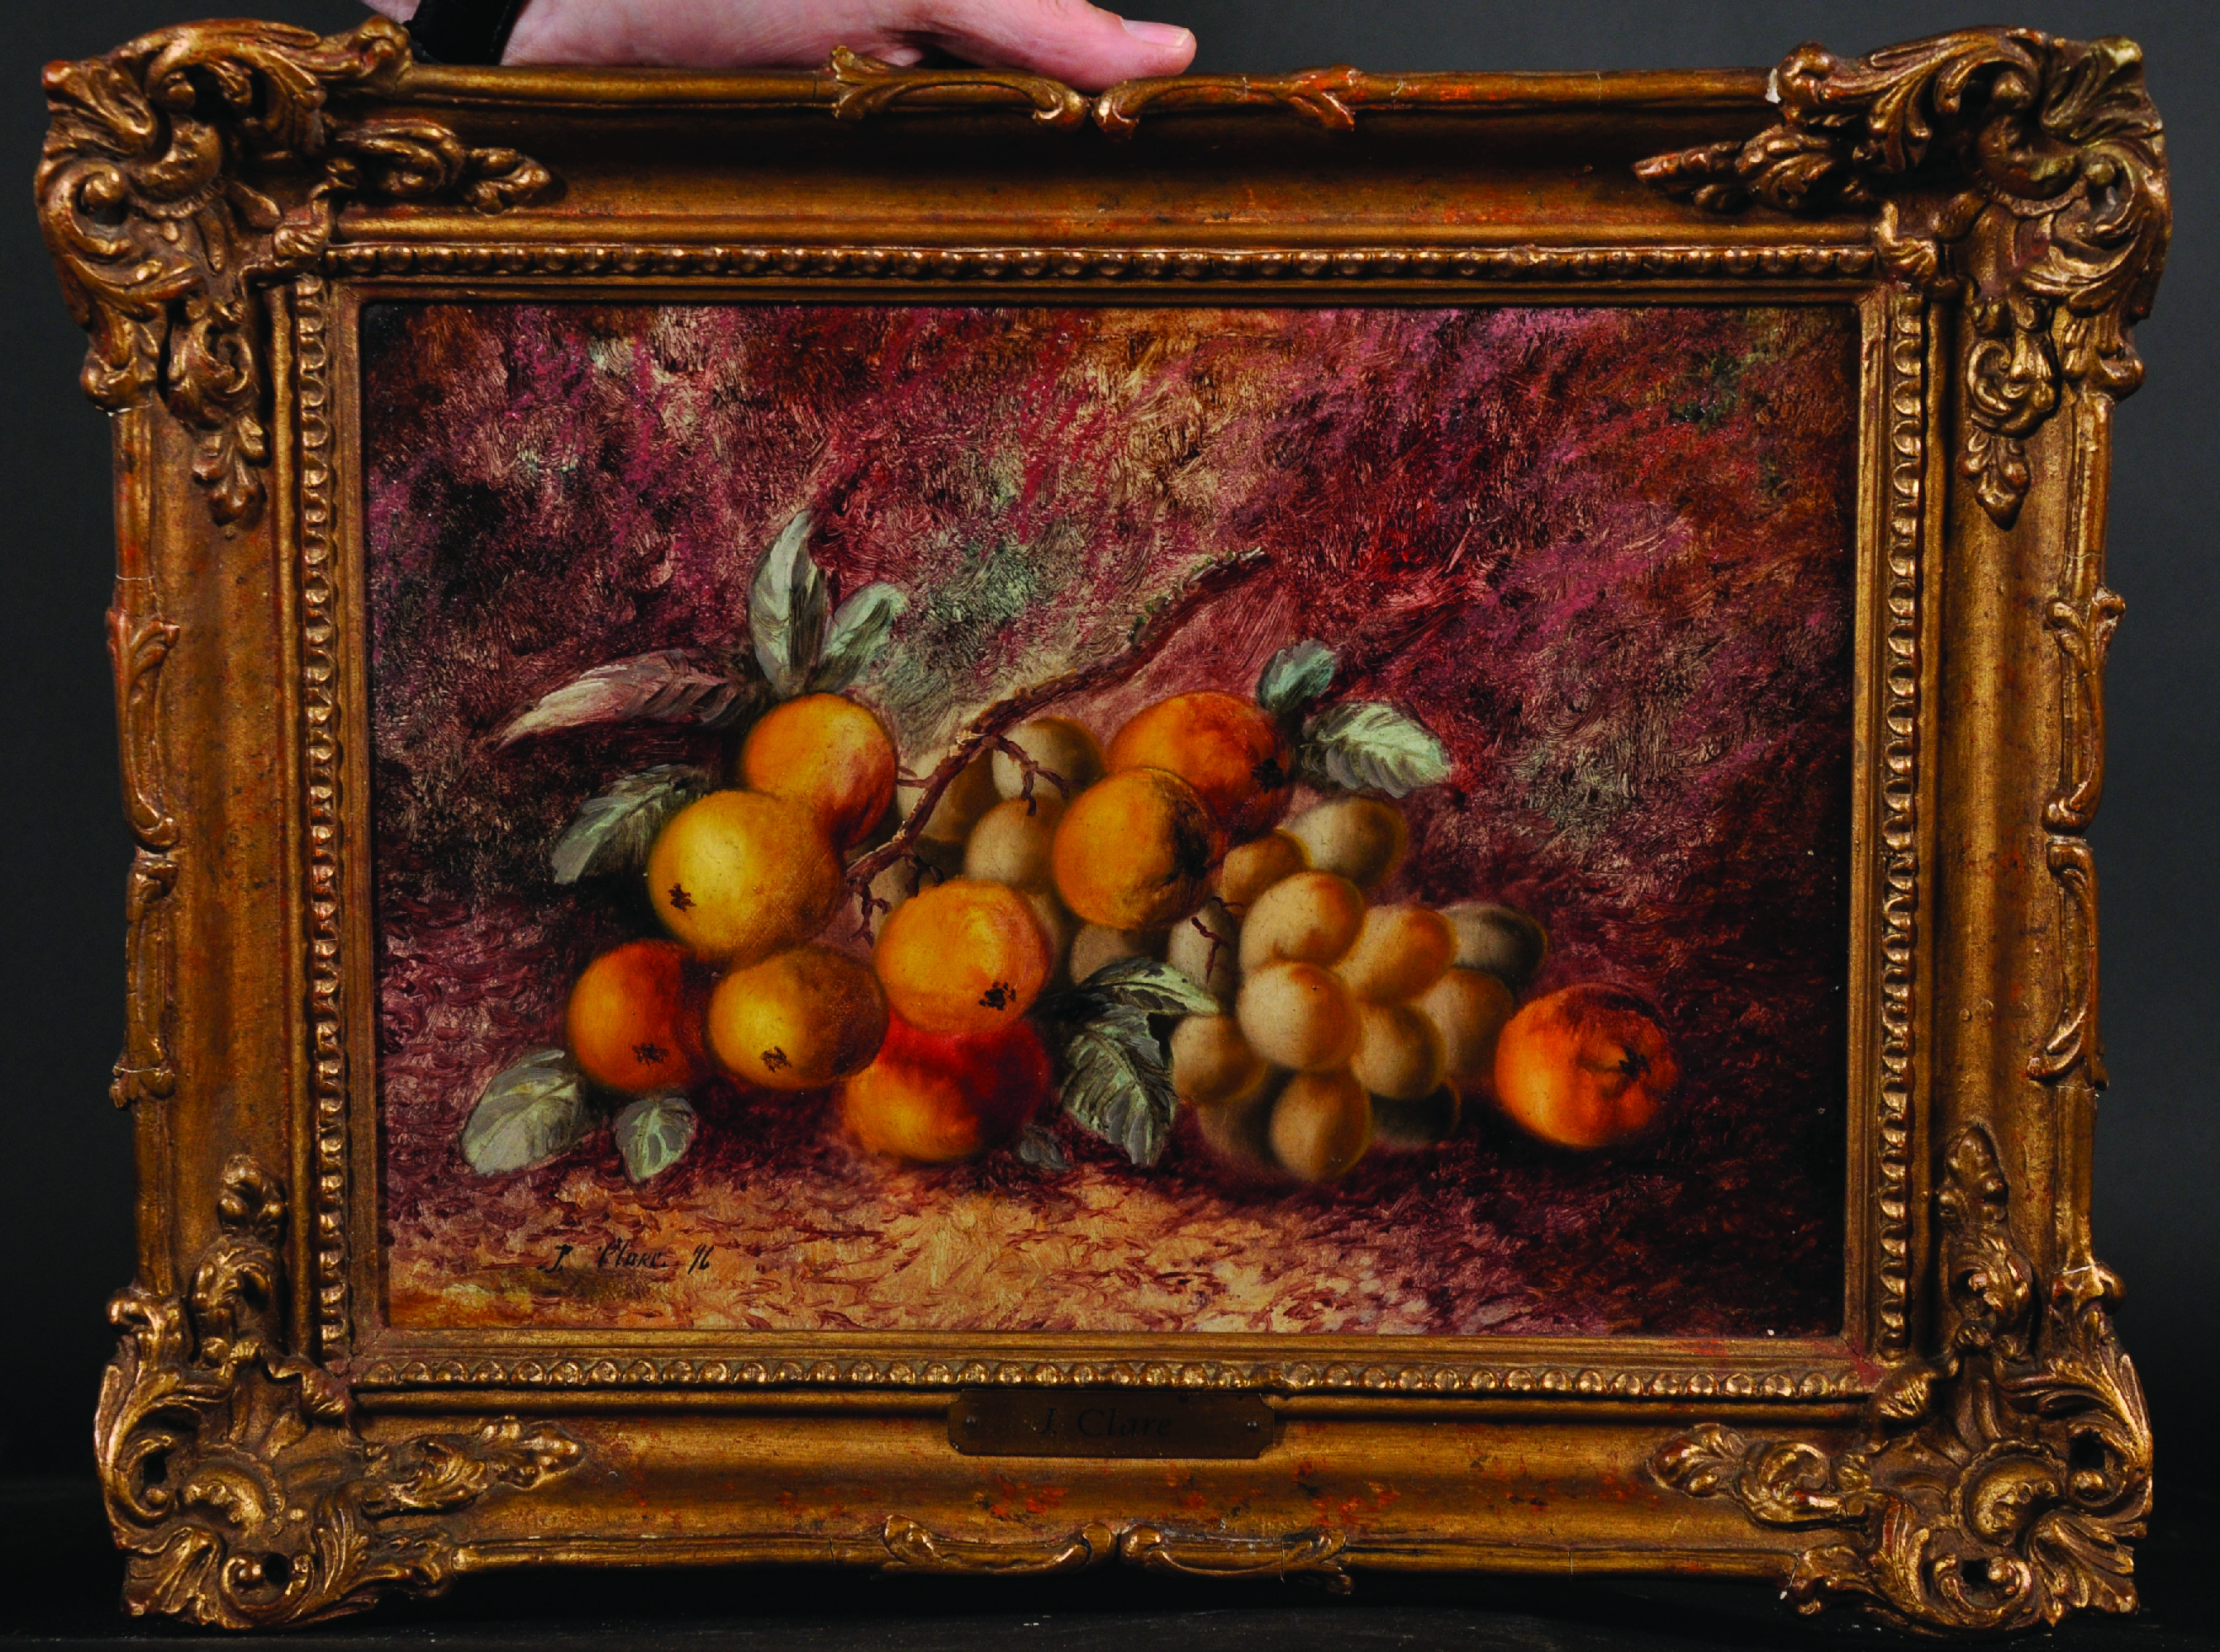 J...Clare (19th-20th Century) British. Still Life with Apples and Plums, Oil on Canvas, Signed and - Image 2 of 4